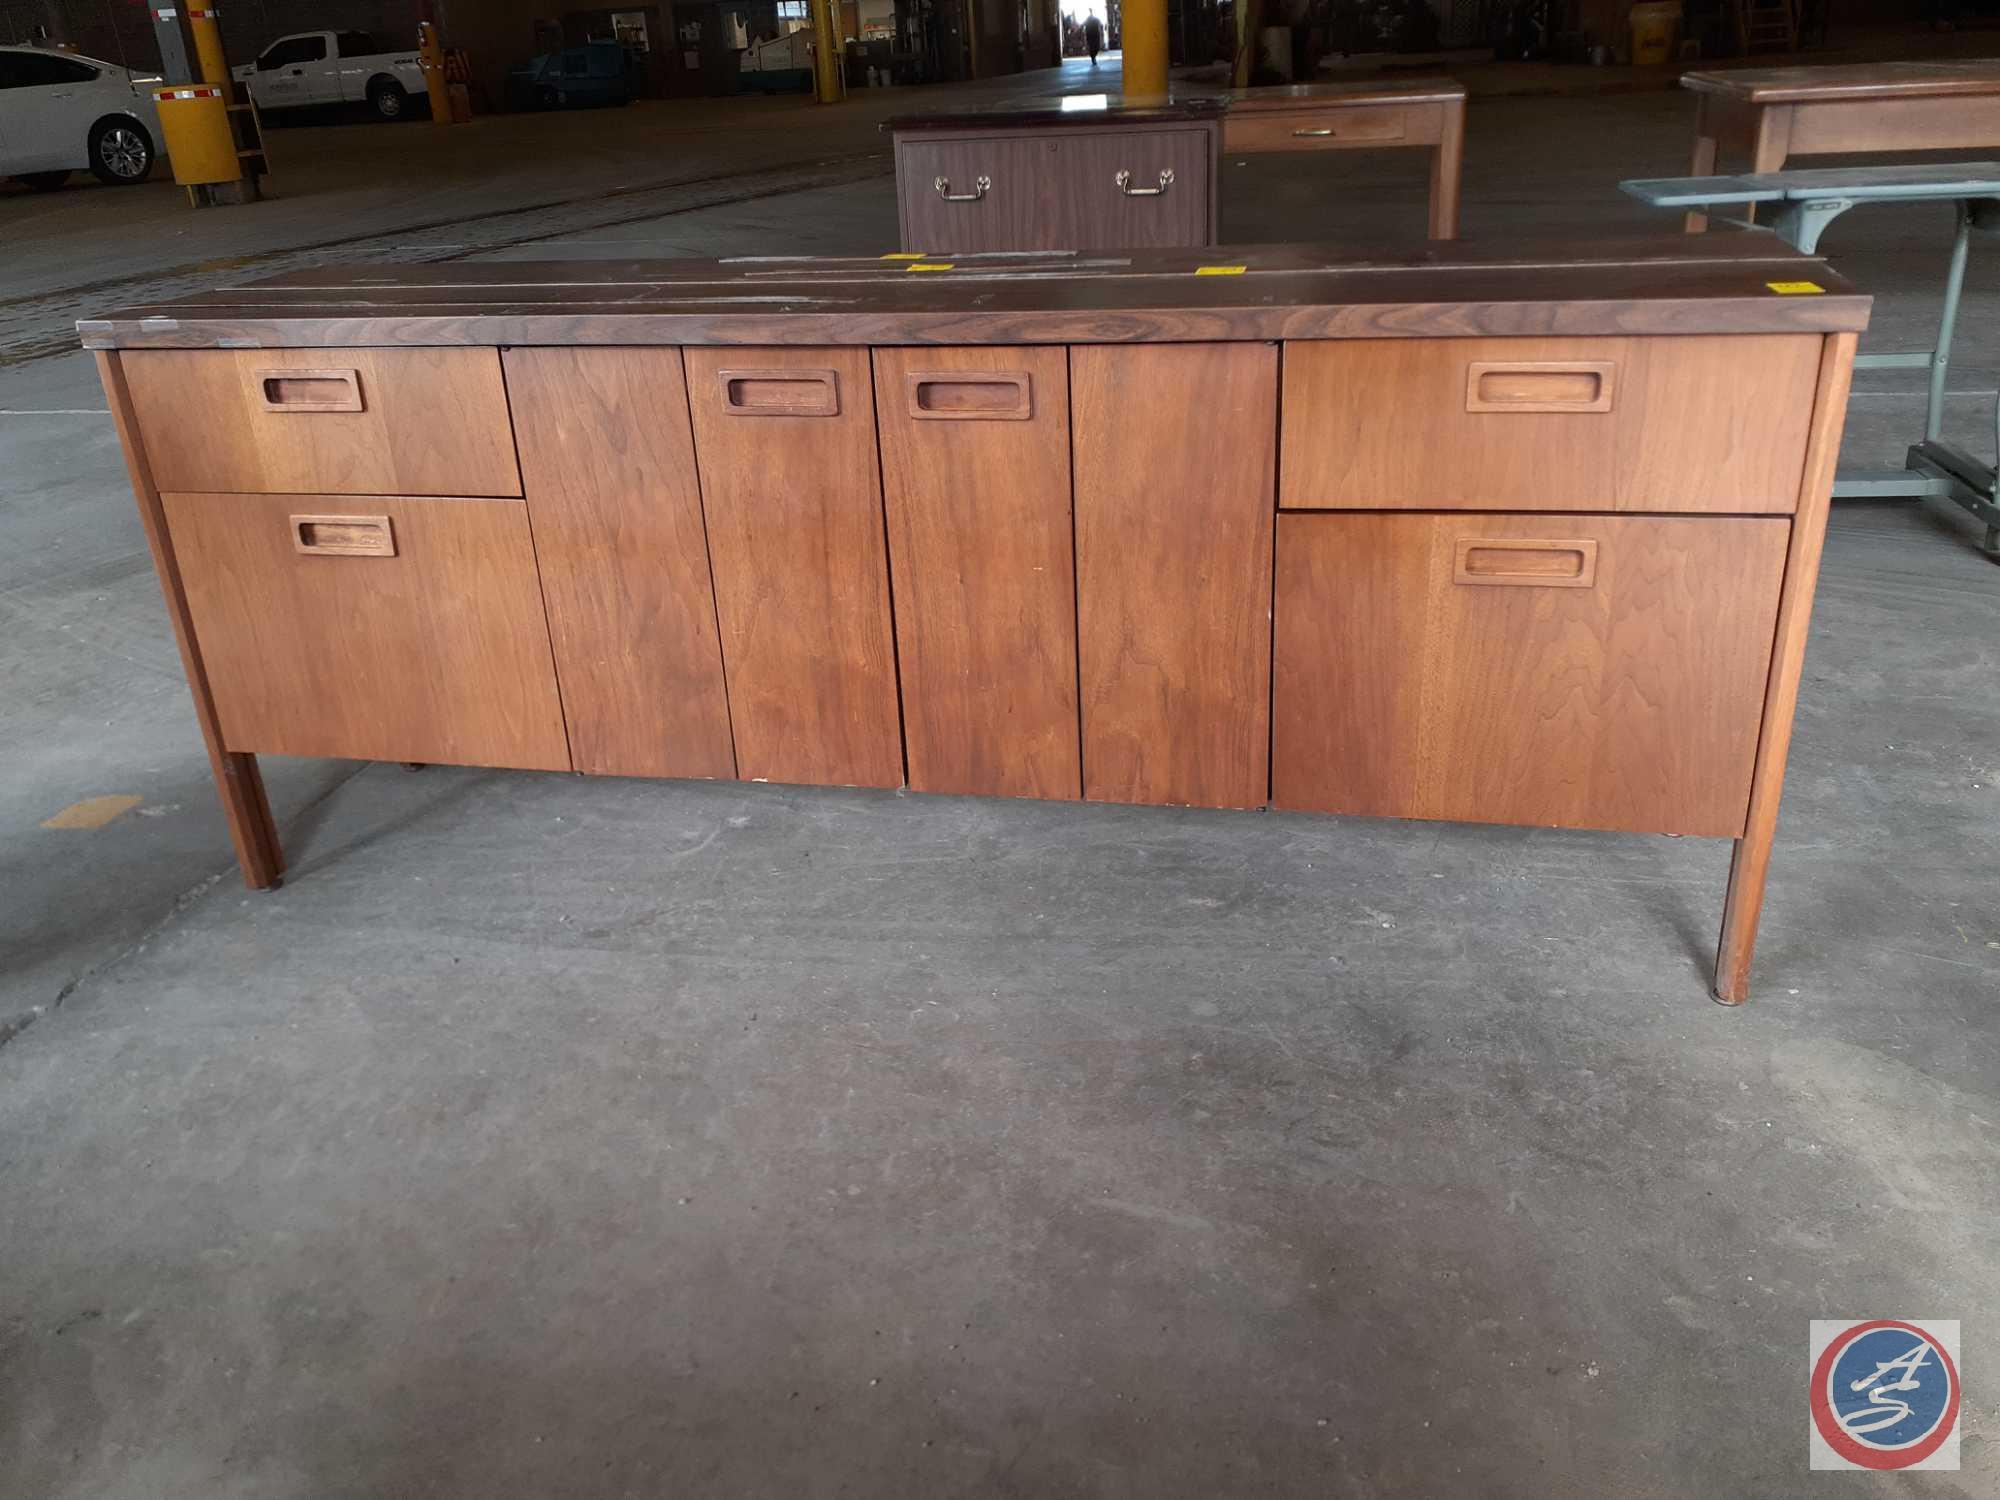 Antique / vintage wood credenza with two doors on the left, two doors on the right, and two bifold